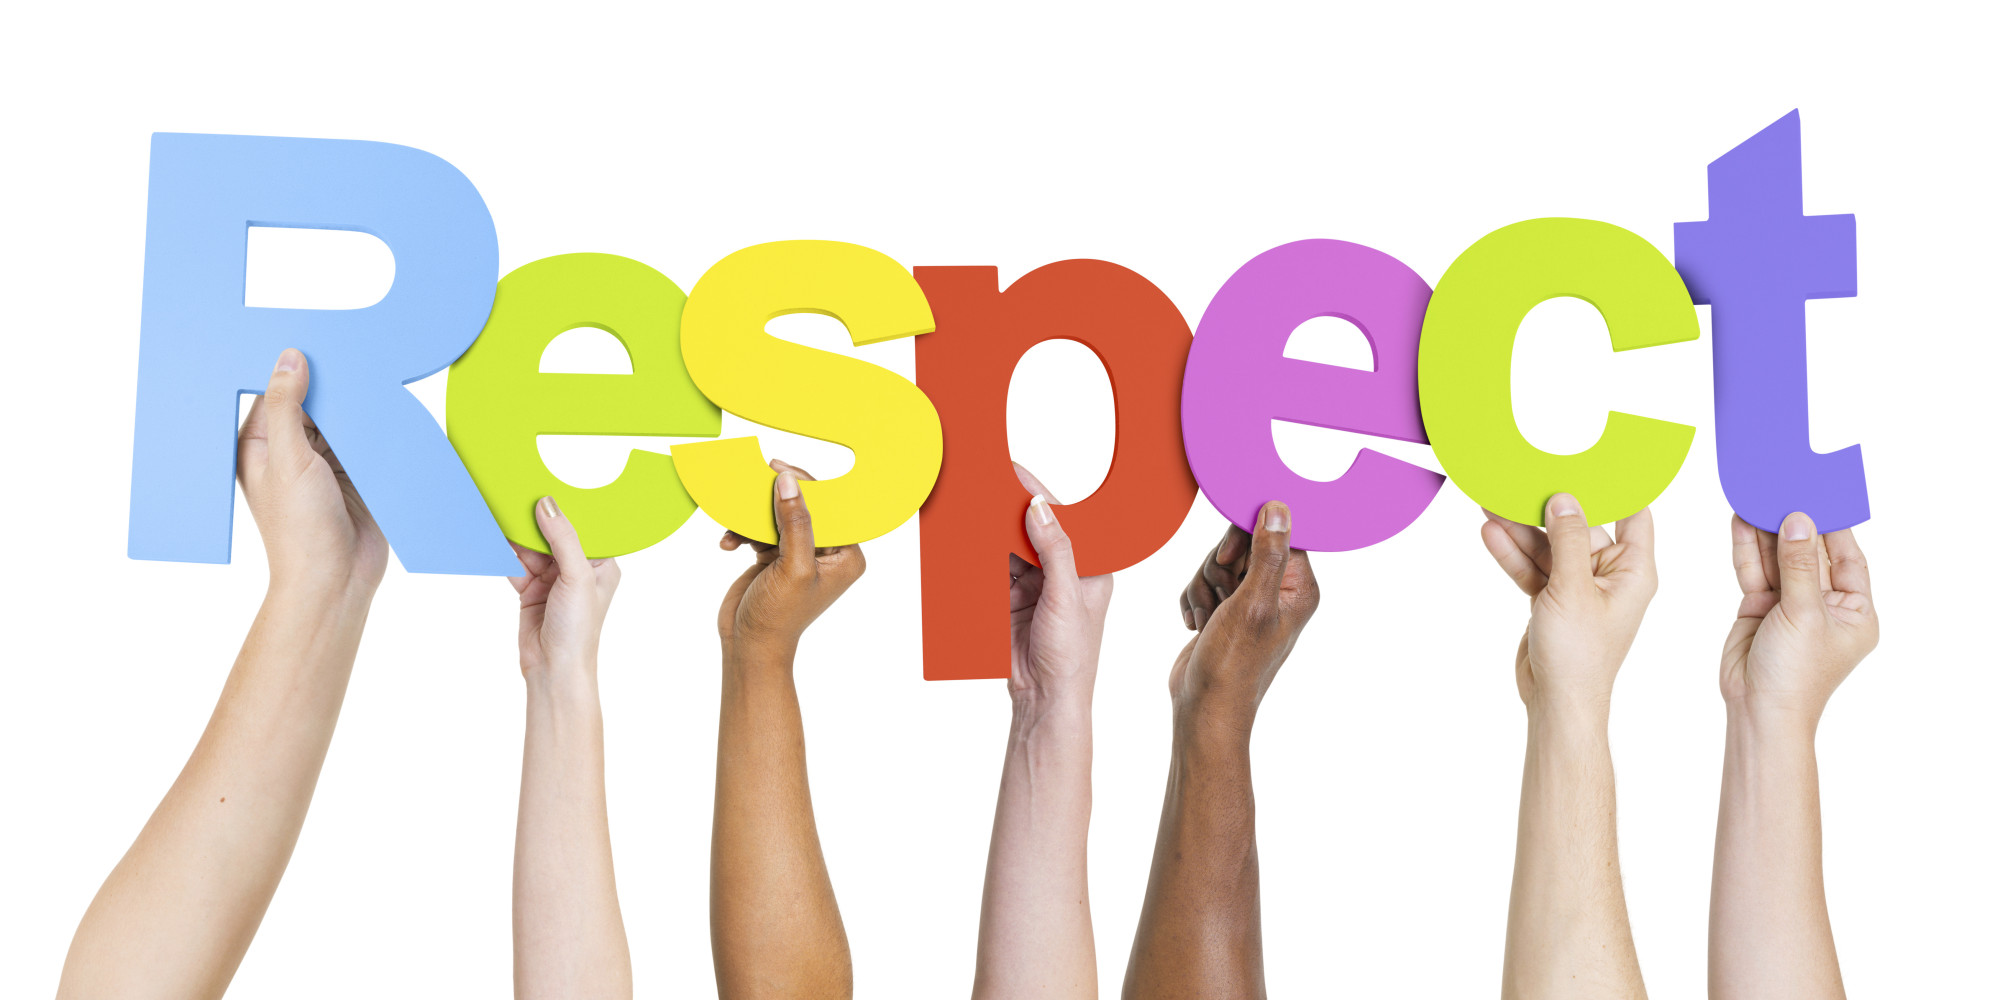 respecting differences essay